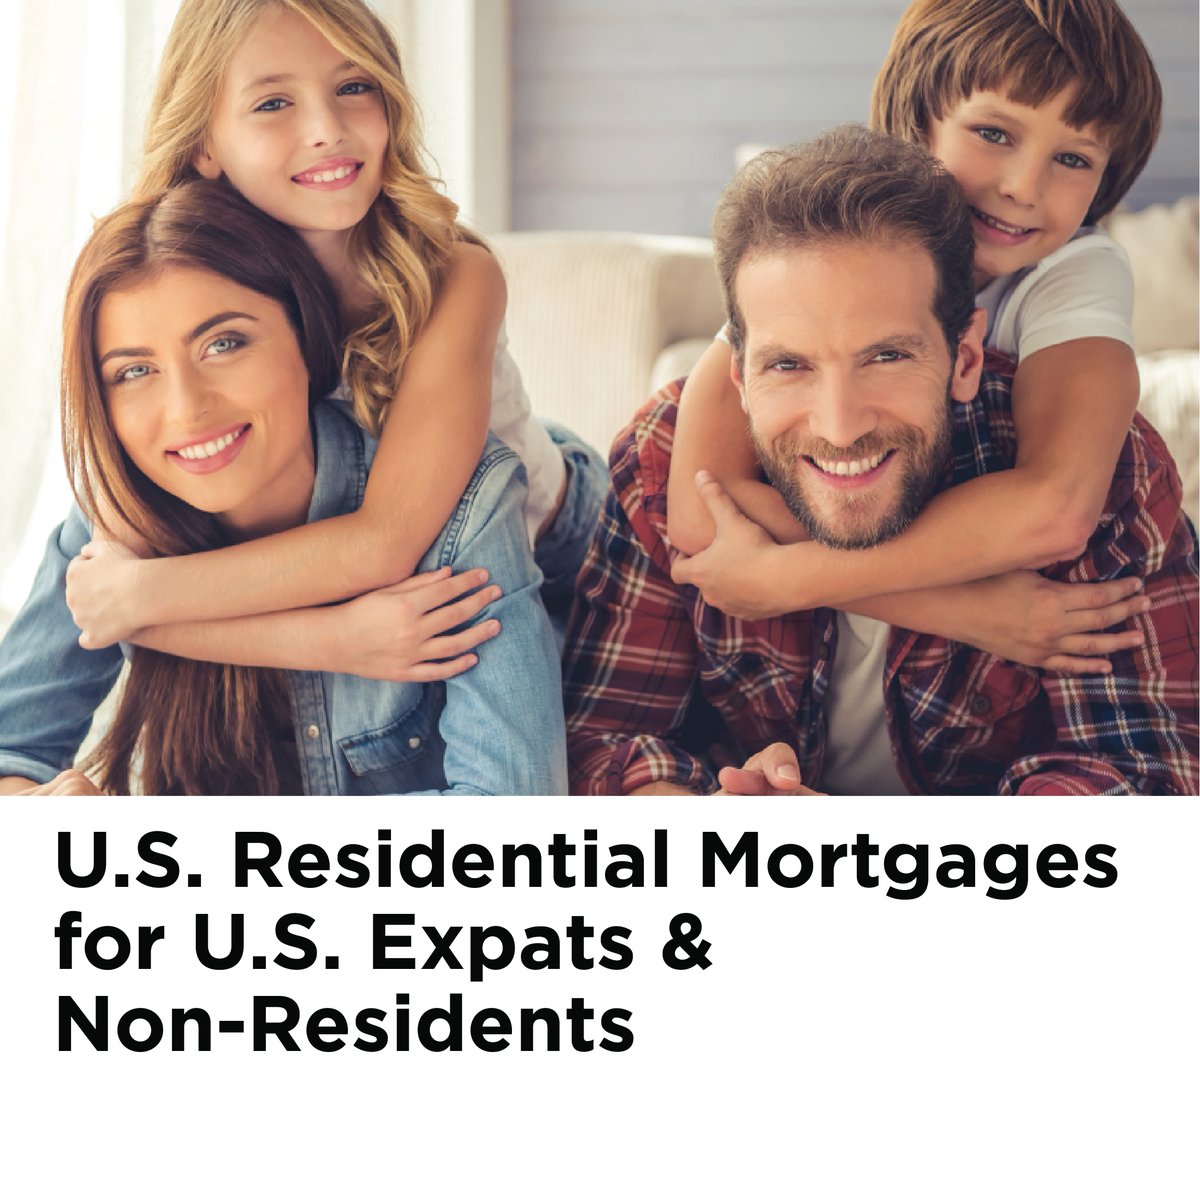 U.S. expats and non-residents looking to buy a home in the U.S.? We can help you with your mortgage!

hello@americamortgages.com | americamortgages.com
.
.
#purchaseahome #purchaseproperty #realestate #mortgage #firsttimehomebuyer #realtor #refinance #homebuying #homeownership